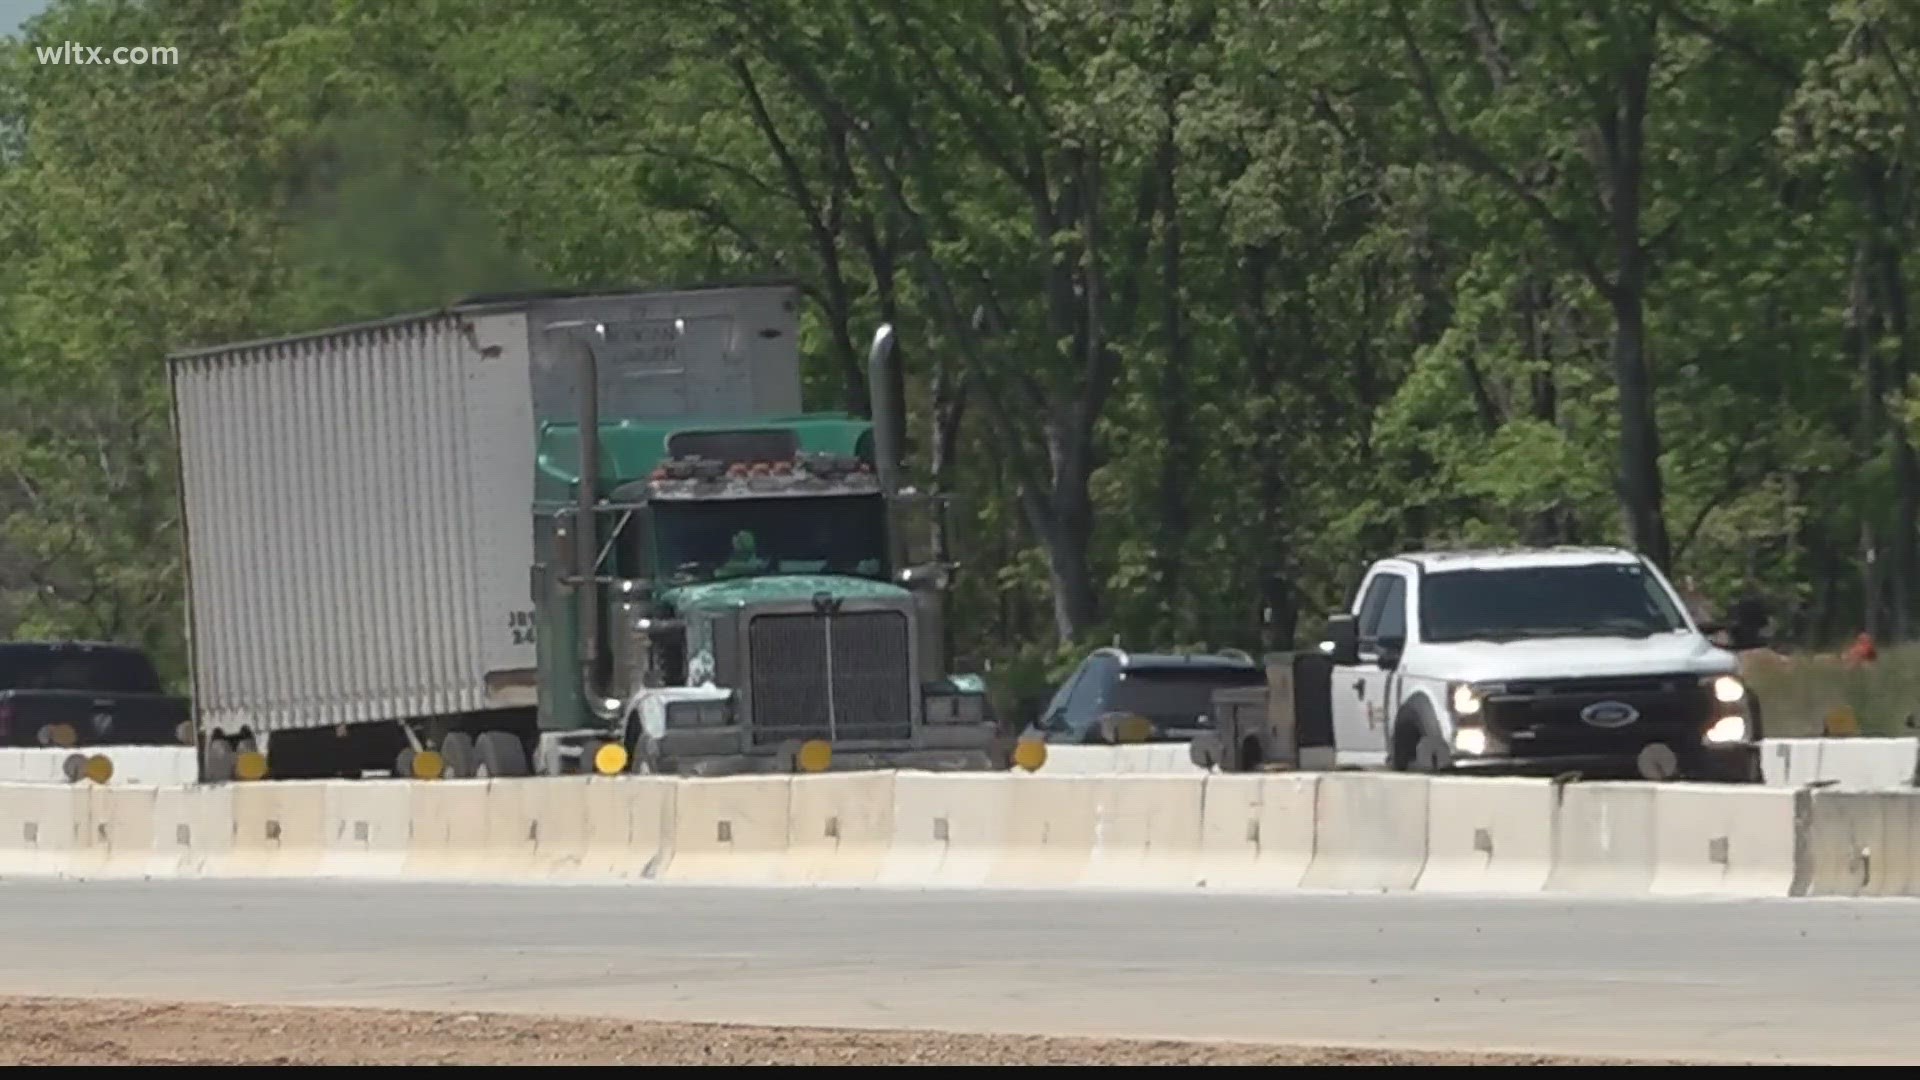 The tractor-trailer accident on Wednesday left drivers stranded for hours on I-95.